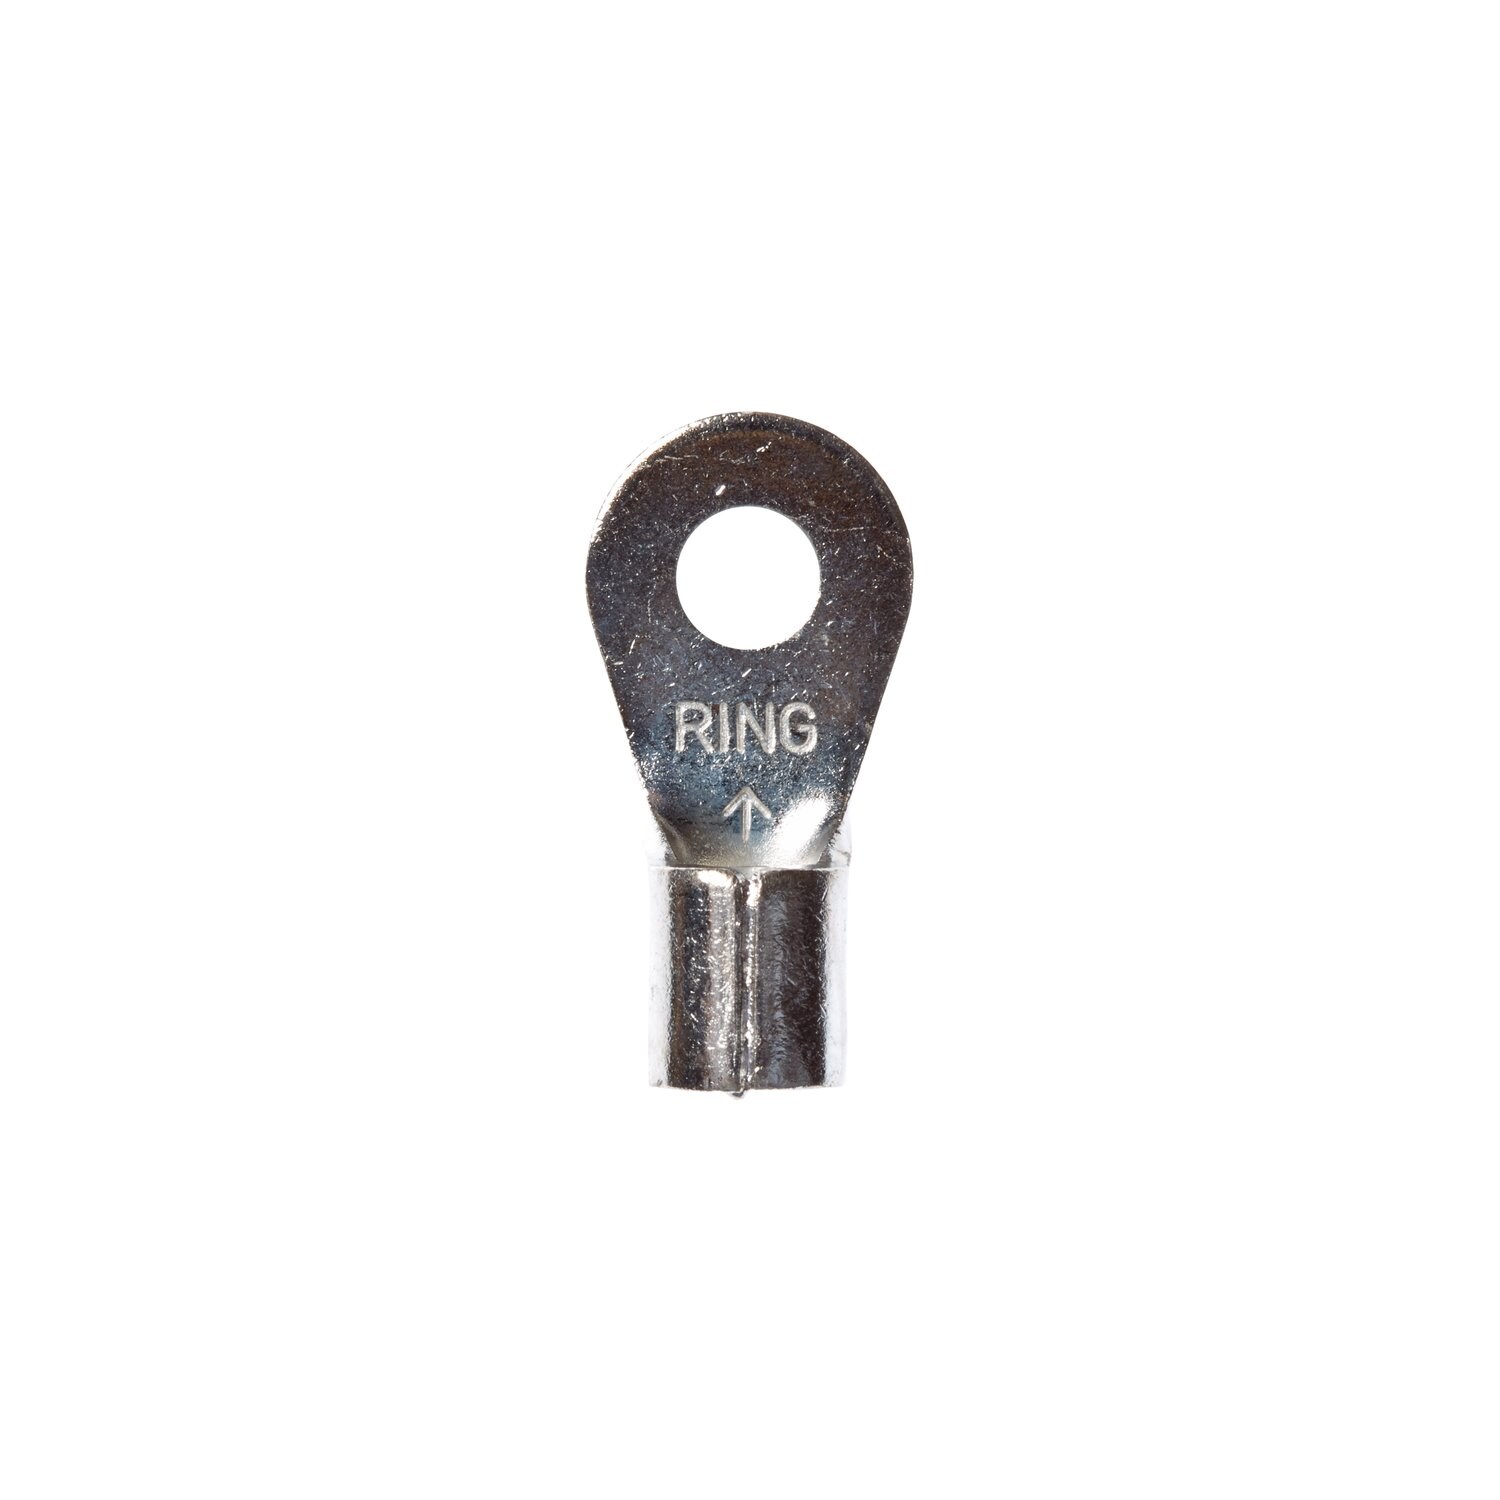 7000133302 - 3M Scotchlok Ring Non-Insulated, 10/bottle, M8-10R/SX, standard-style
ring tongue fits around the stud, 100/Case